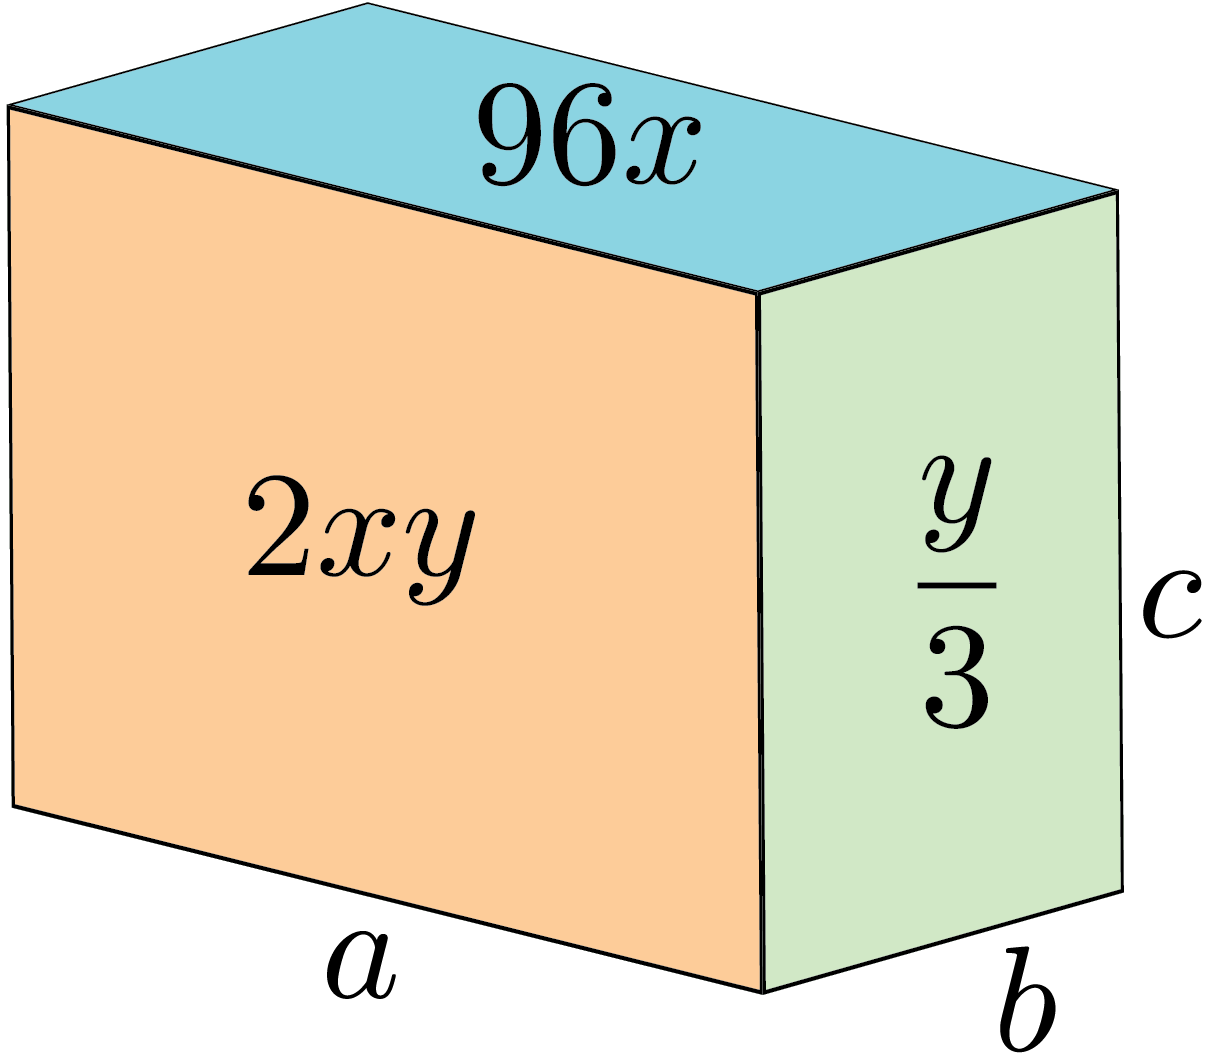 A rectangular prism with three visible faces. The front face of the prism has area 2xy and its bottom edge has length a. The side face of the prism has area y over 3, its bottom edge has width b and its height is c. The top face has area 96x.